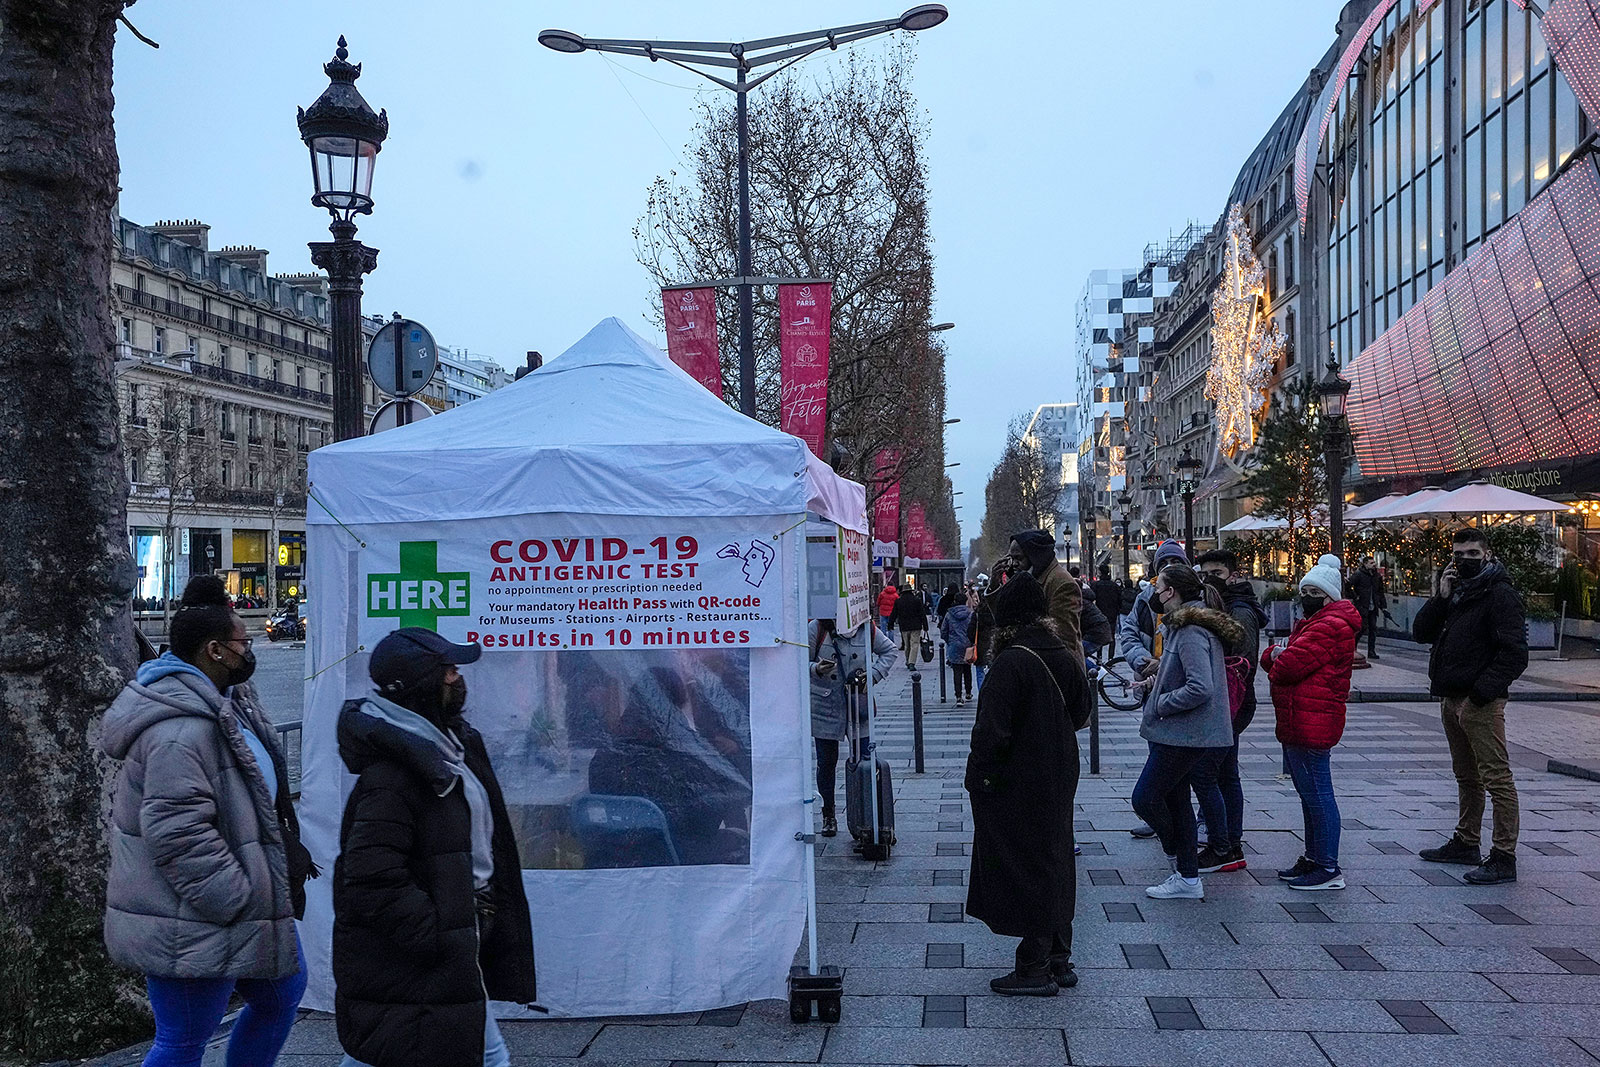 People line up to get tested for Covid-19 in Paris on December 24.